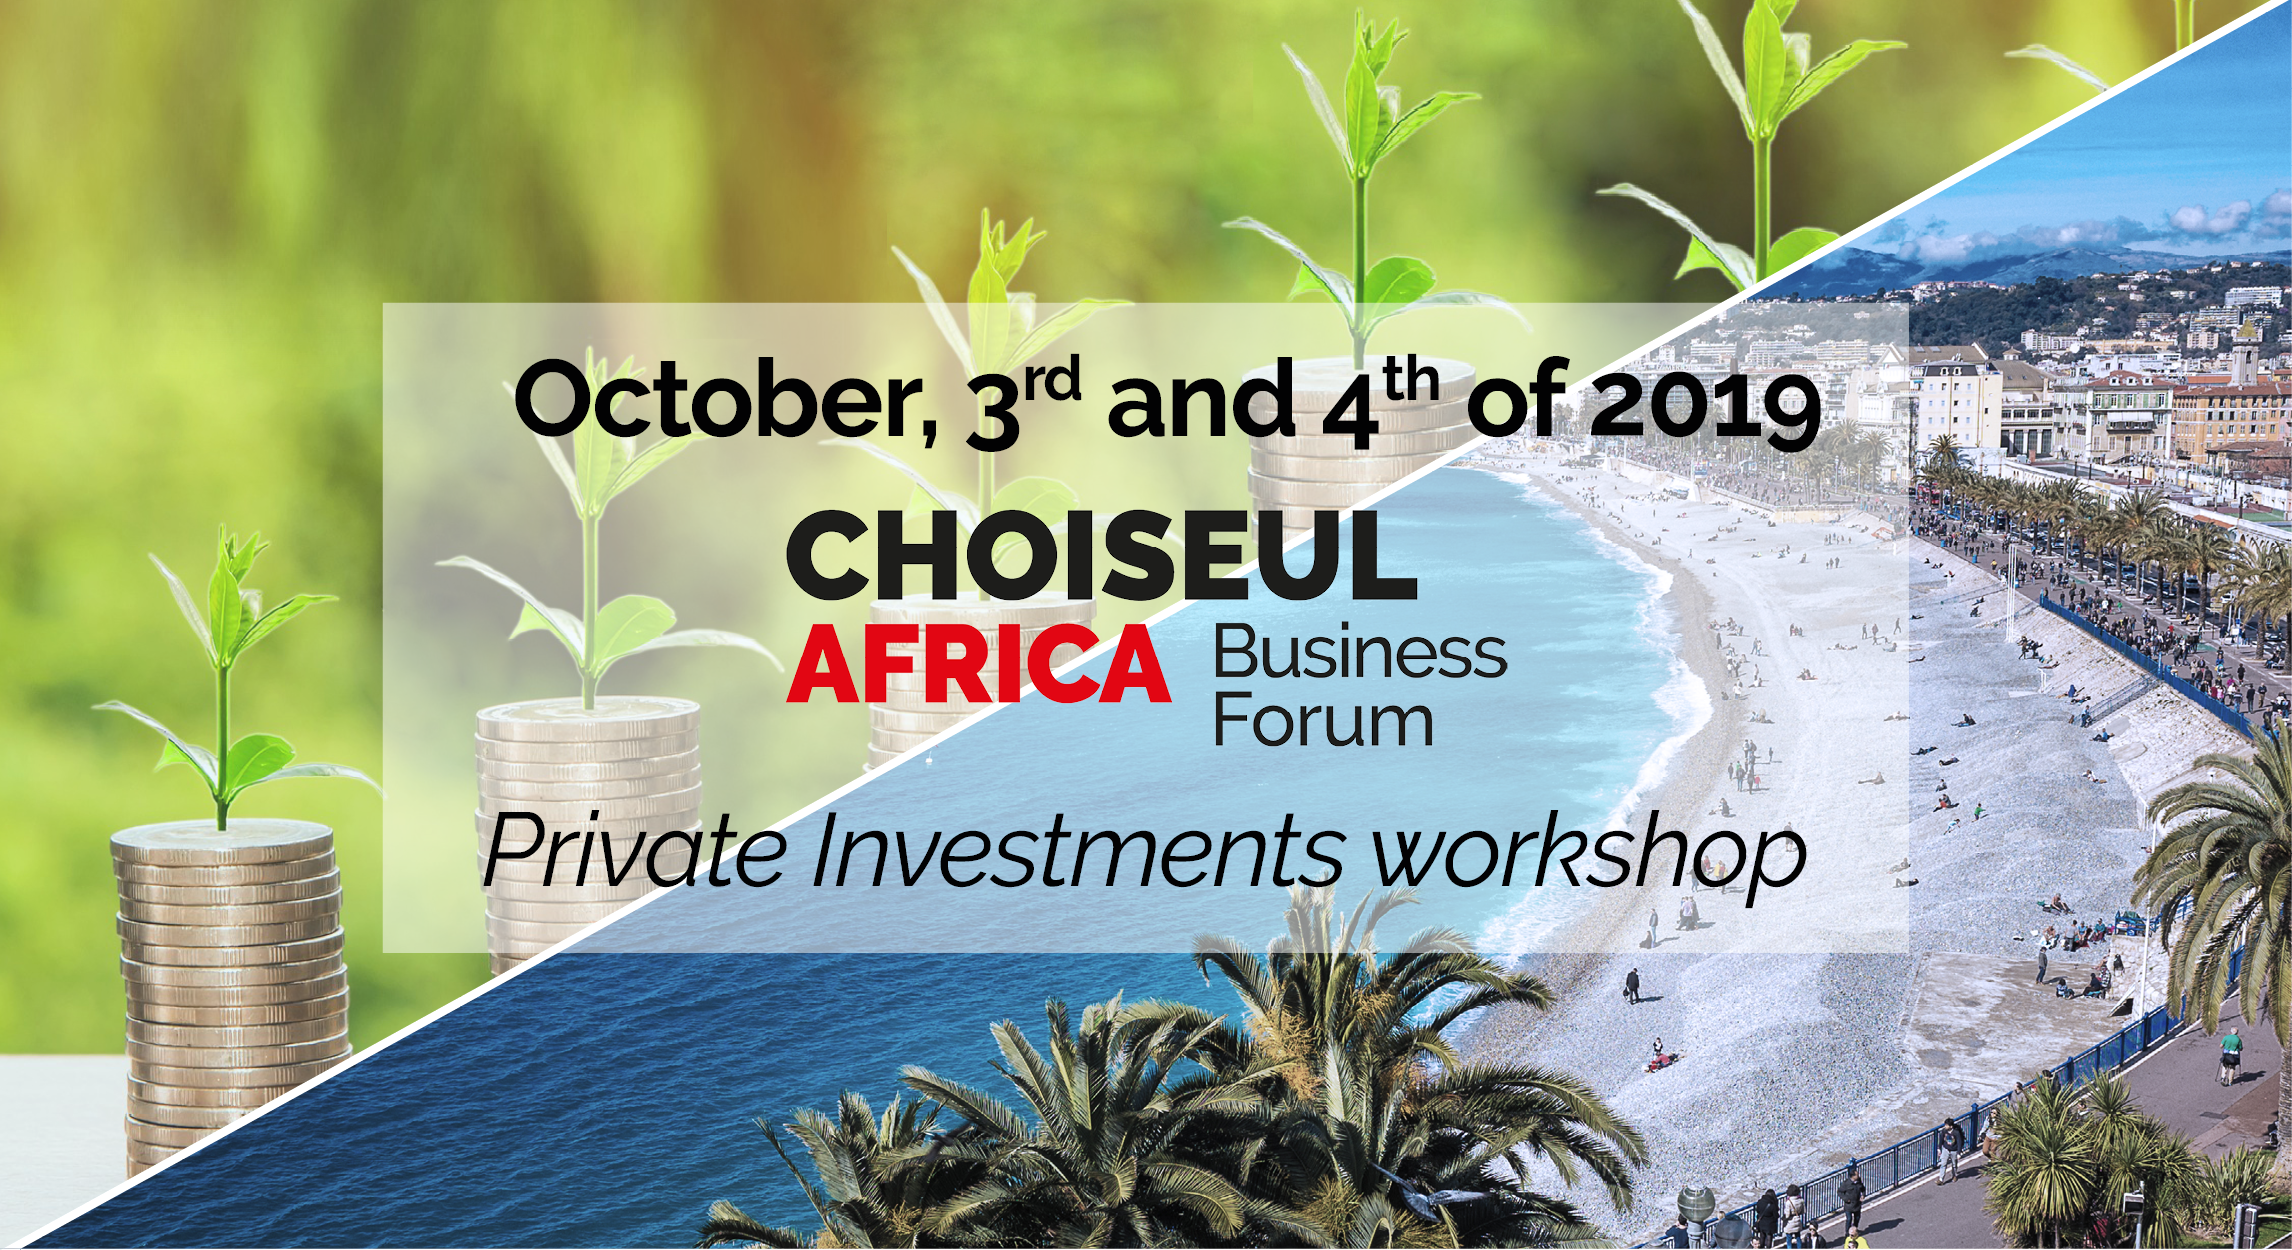 Which successful strategy to attract private investments in Africa?